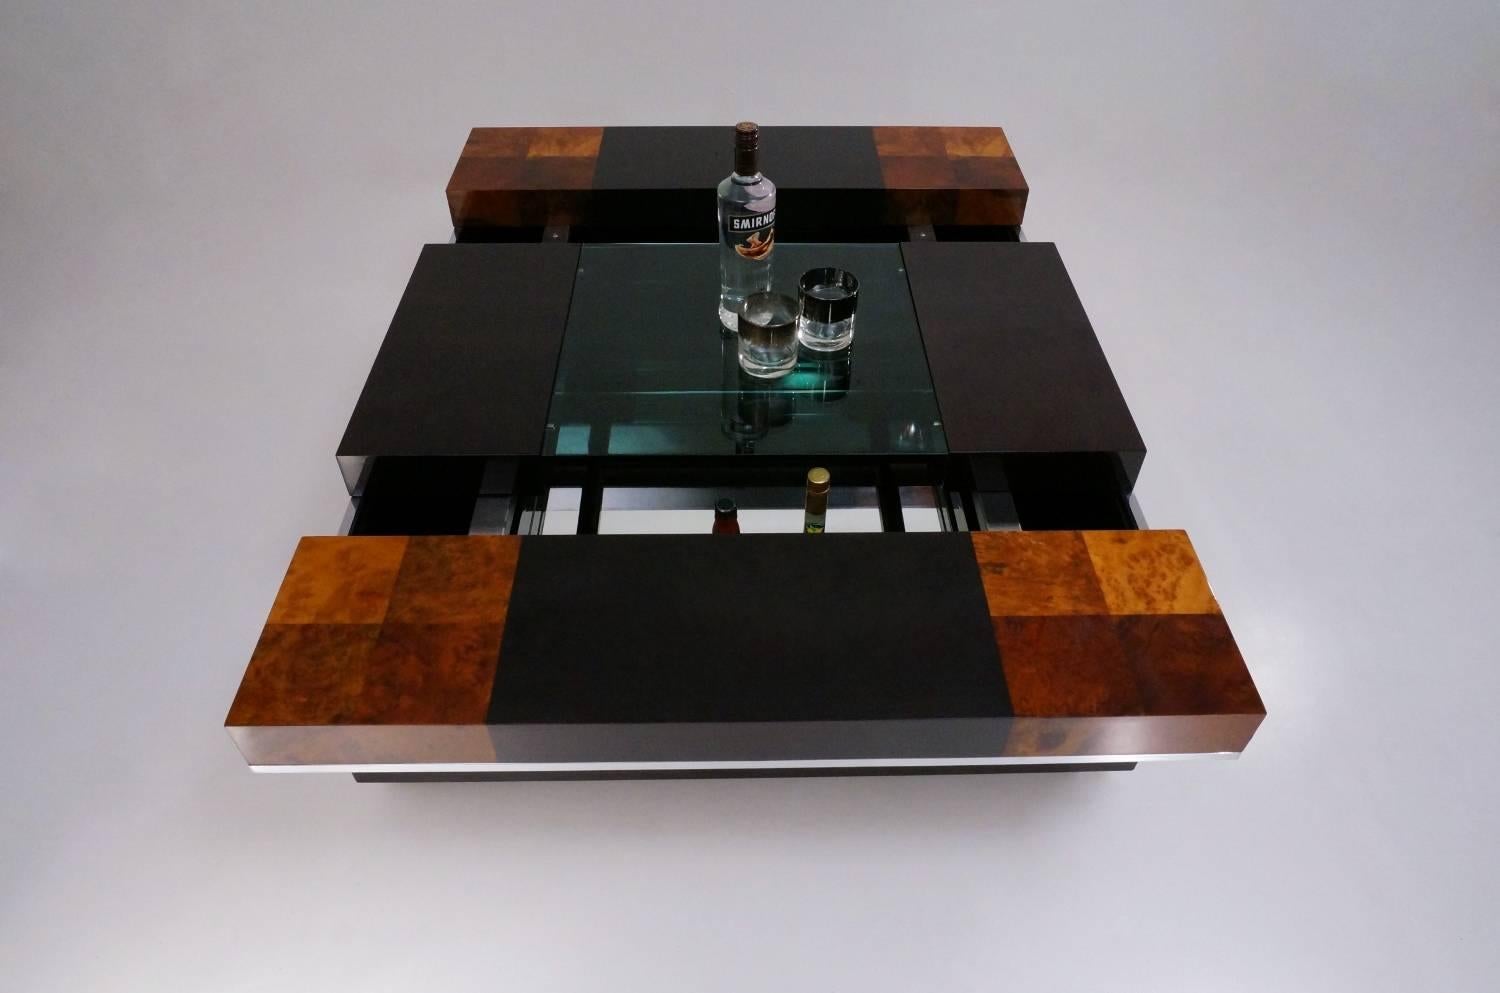 Willy Rizzo bar table, burl wood veneer, black stained veneer, glass, mirror and chrome, 1970s, circa, Italian. 

This table has been thoroughly cleaned respecting the vintage patina and is ready to use.

The attributed designer of this coffee